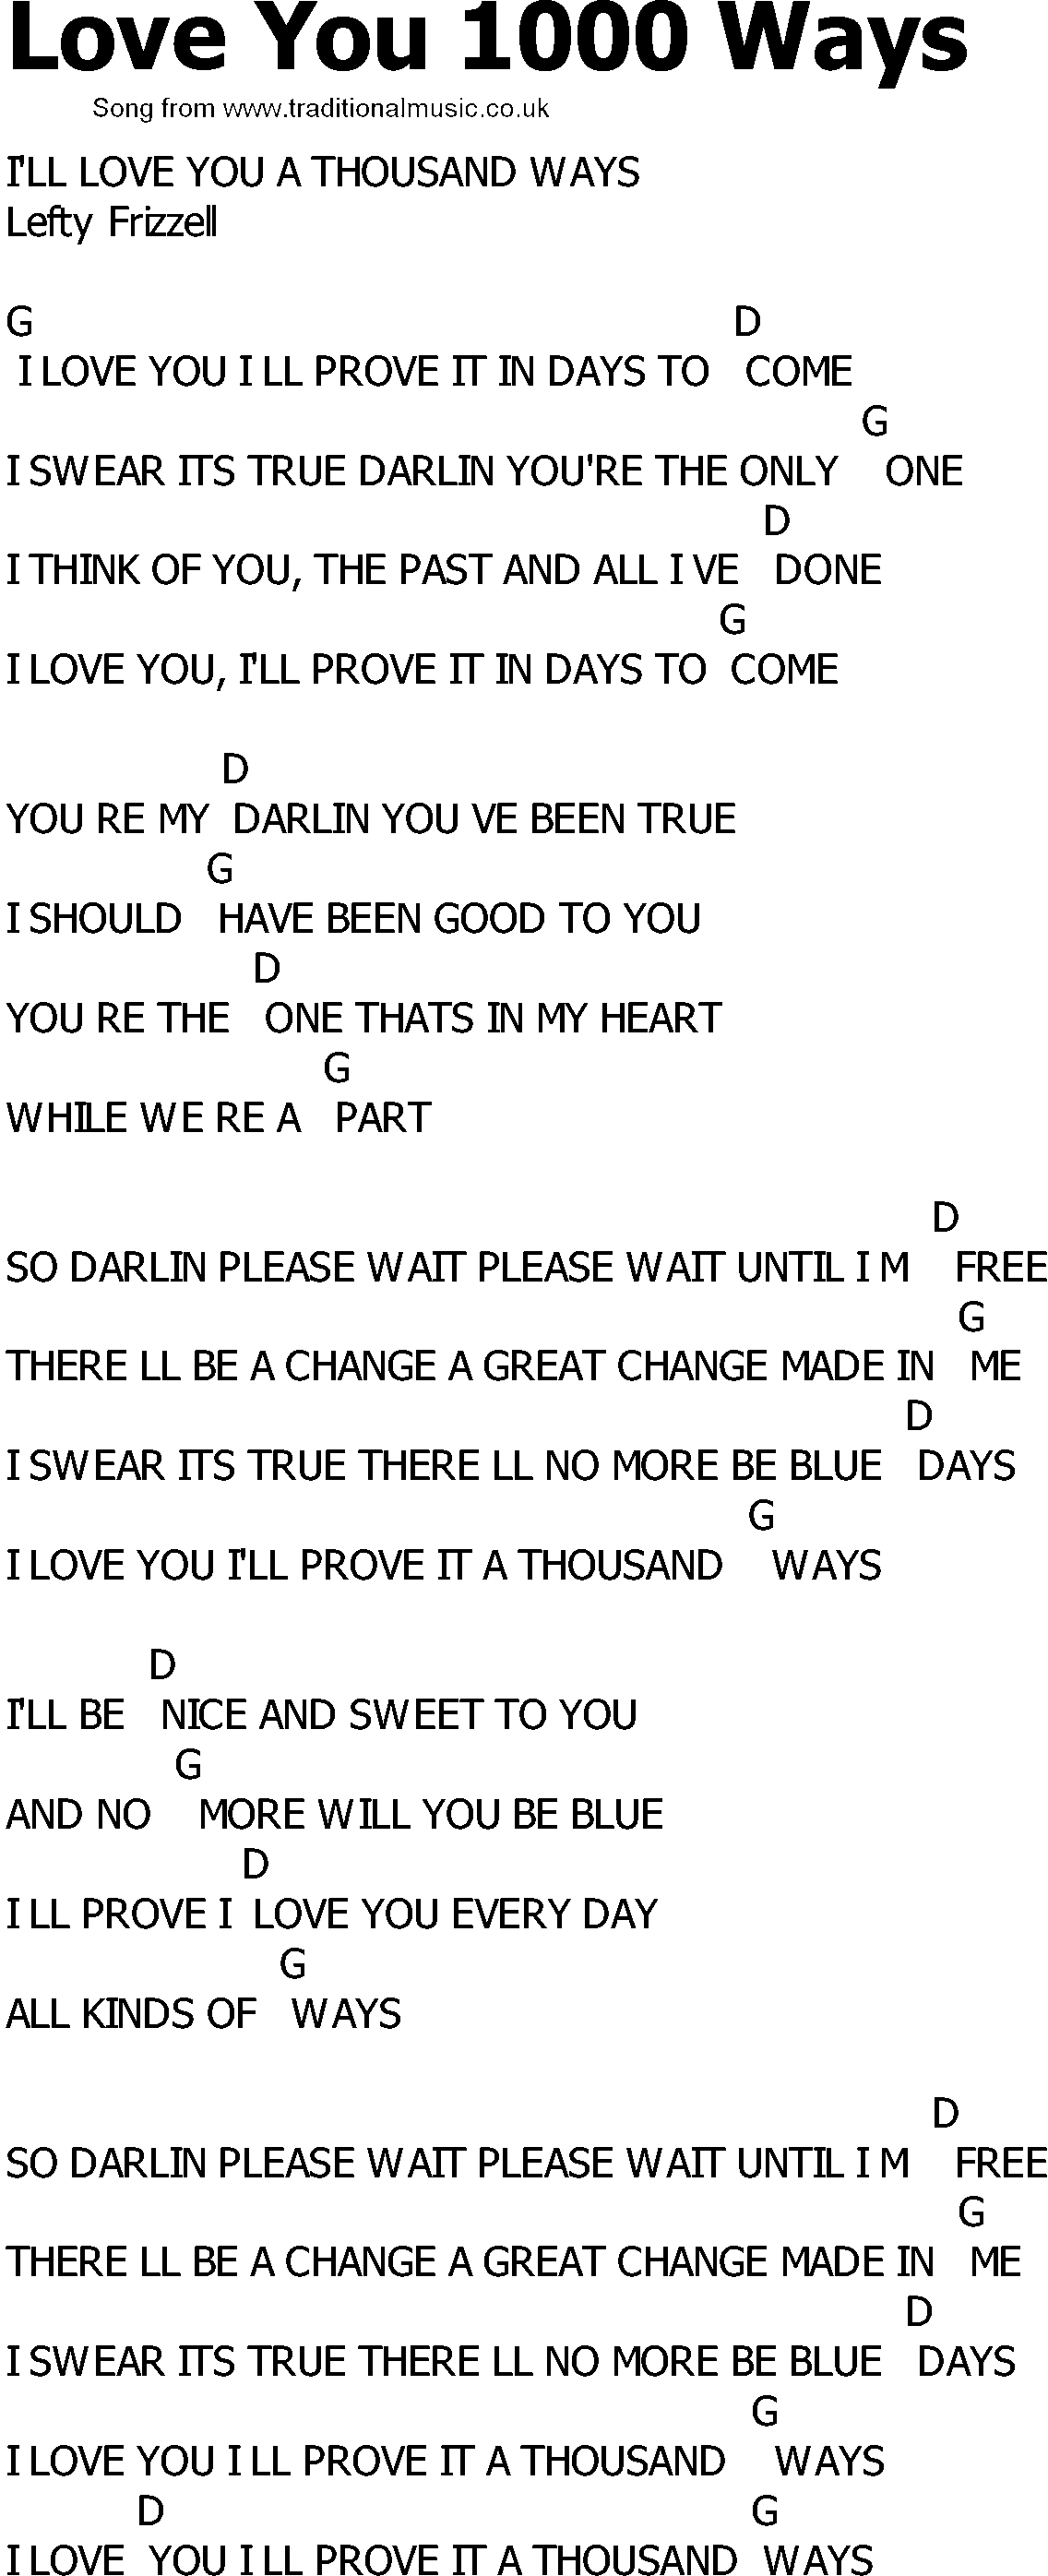 Old Country song lyrics with chords - Love You 1000 Ways